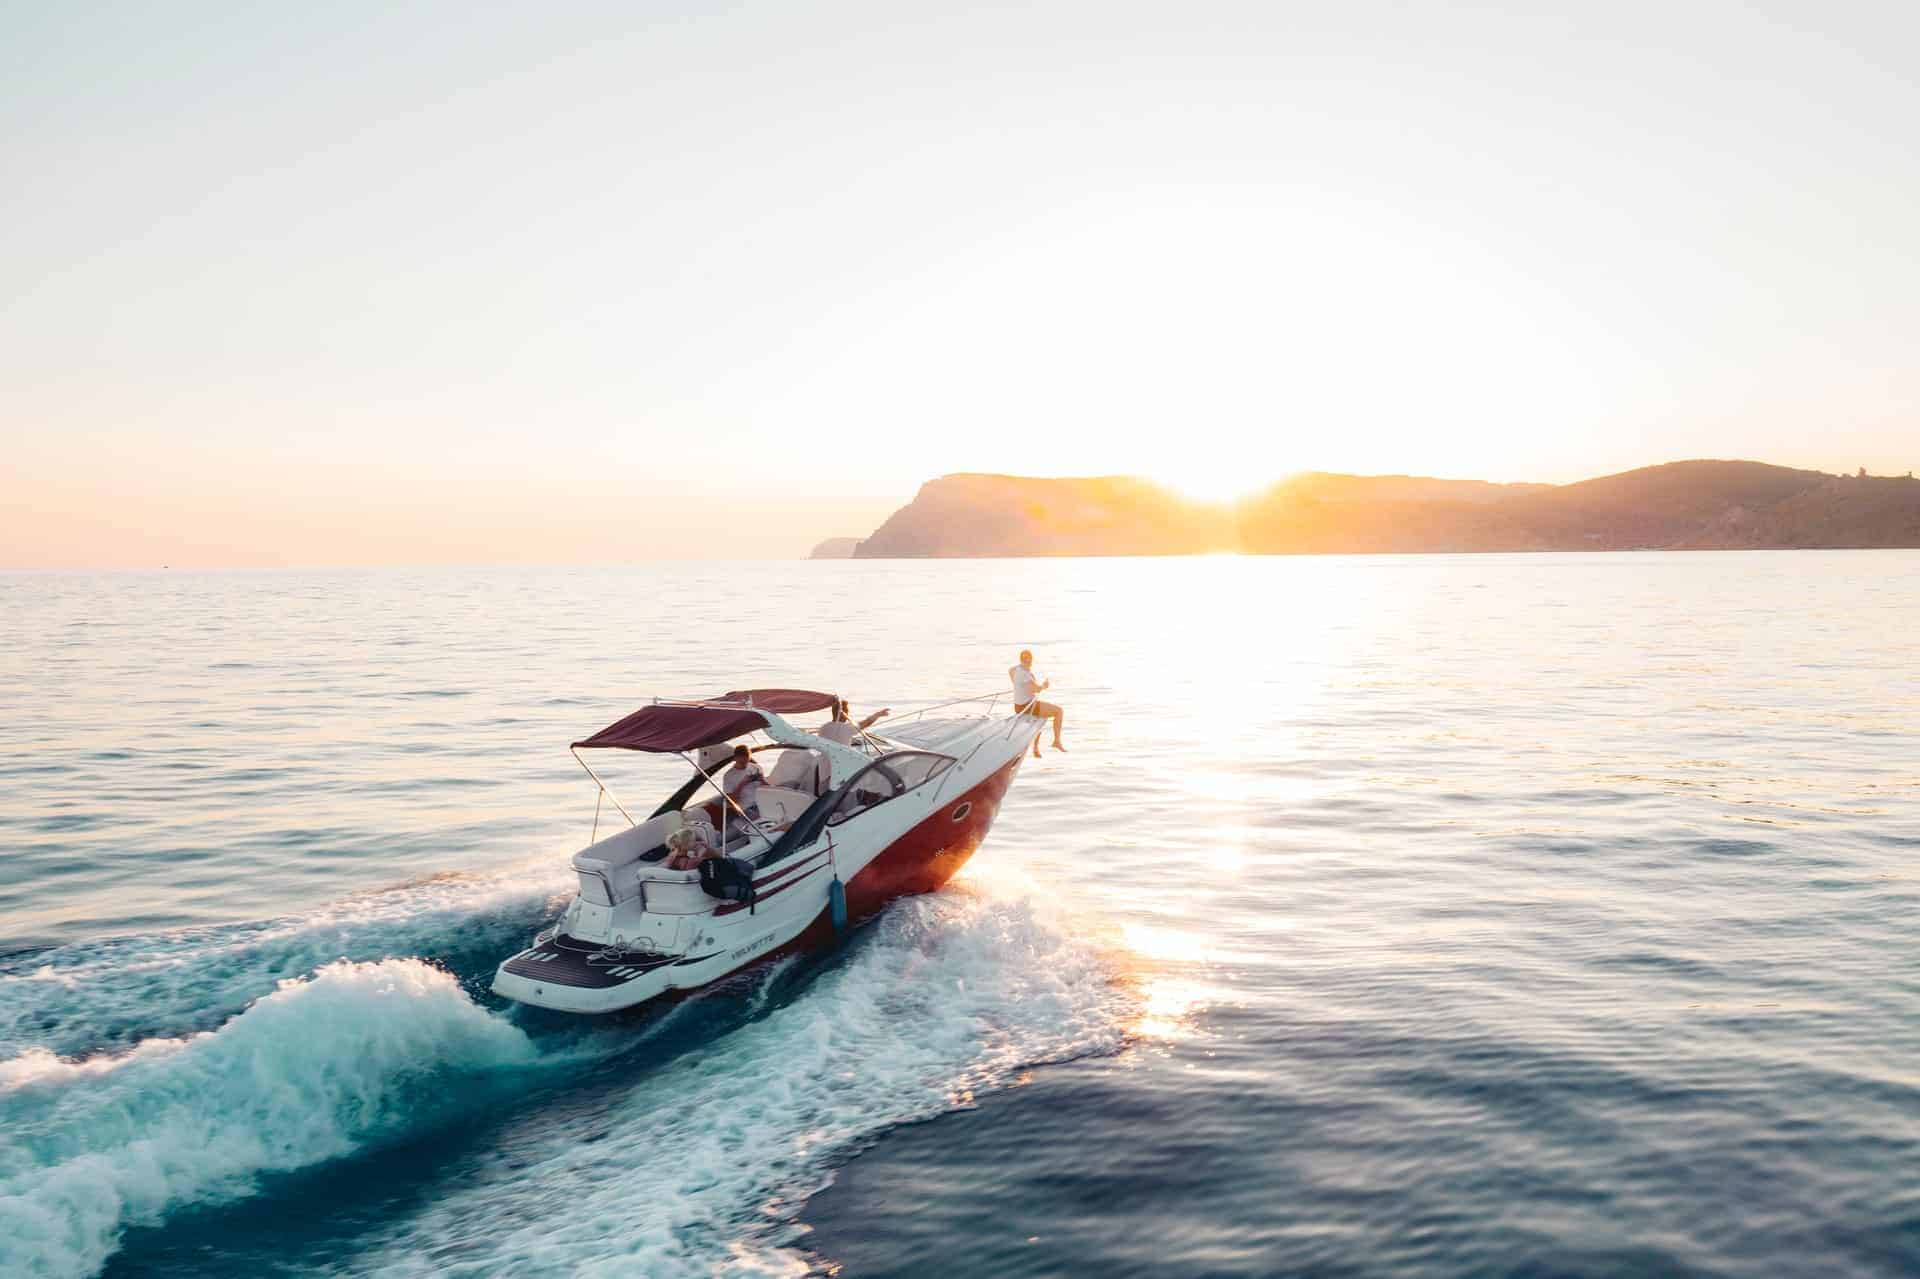 Dreaming of owning your own yacht? Check out how to choose the best